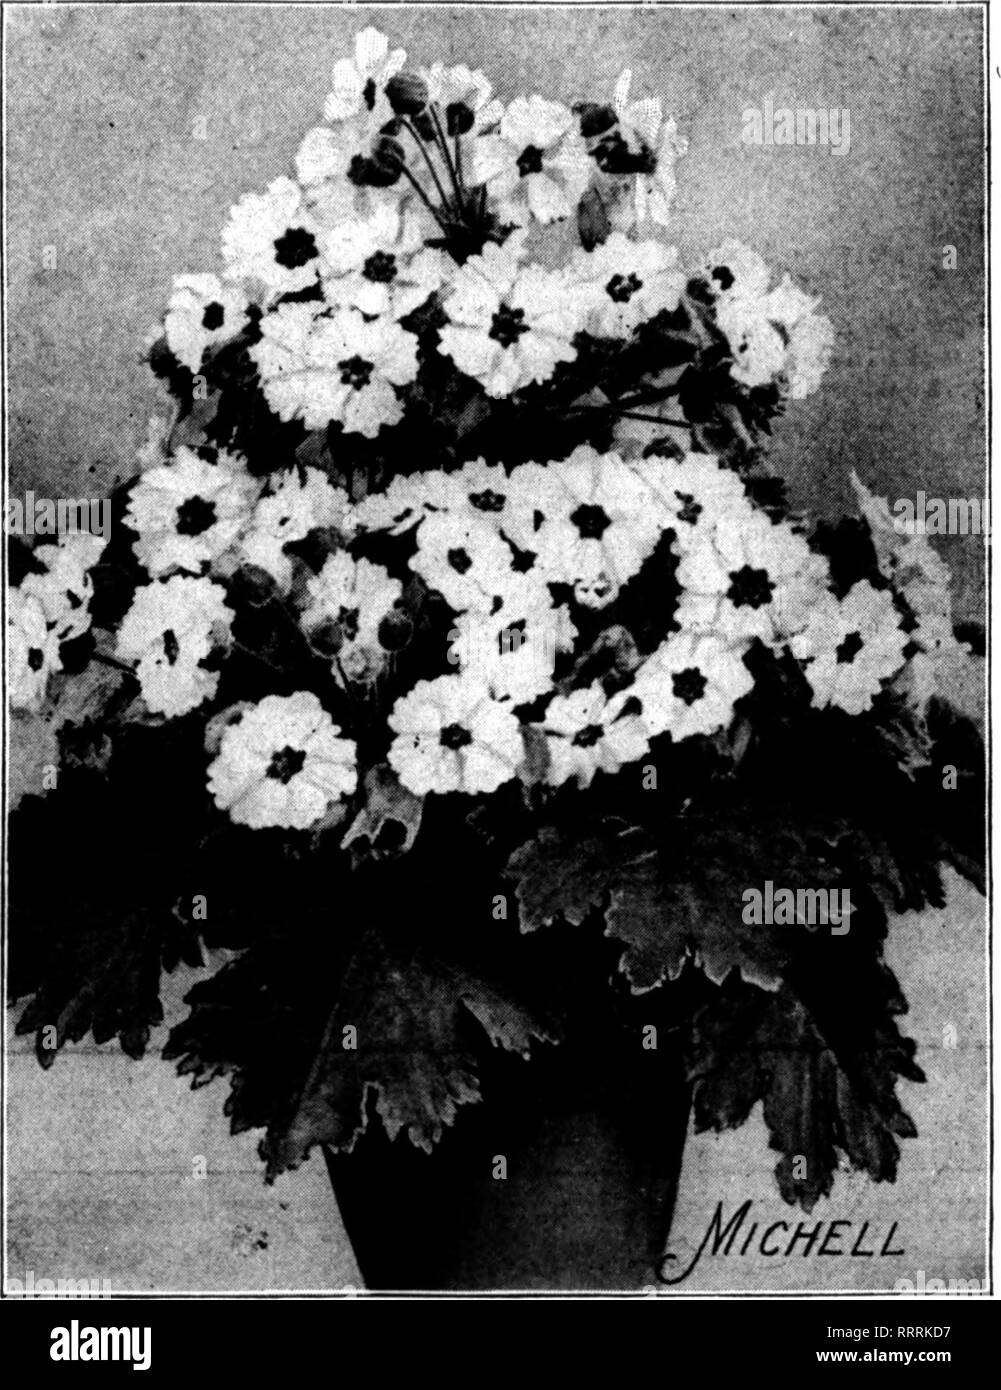 . Florists' review [microform]. Floriculture. 38 The Florists' Review May 7, 1914,. Make a ffiKst class investmenlt by buying MICHELL'S Distinctive Primroses Primula Chlnensis iflTrri Pkt. Trtf. Pkt. Prize Mixture, even blending all colors.. $0.60 $1.00 Alba Magniflca, white 60 1.00 Chiswick Red, red 60 1.00 Duchess, white, rosy carmine; yel. eye.. .60 1.00 Holborn Blue 60 1.00 Kermesina Splendens, crimson 60 1.00 Rosy Morn, pink 60 1.00 Primula Obconica QIgantea Lilacina, pale lilac .50 Rosea, pink .50 Kermesina, deep crimson .60 Alba, White .50 Hybrida Mixed, .50 MICHELL'S Distinctive Cinera Stock Photo